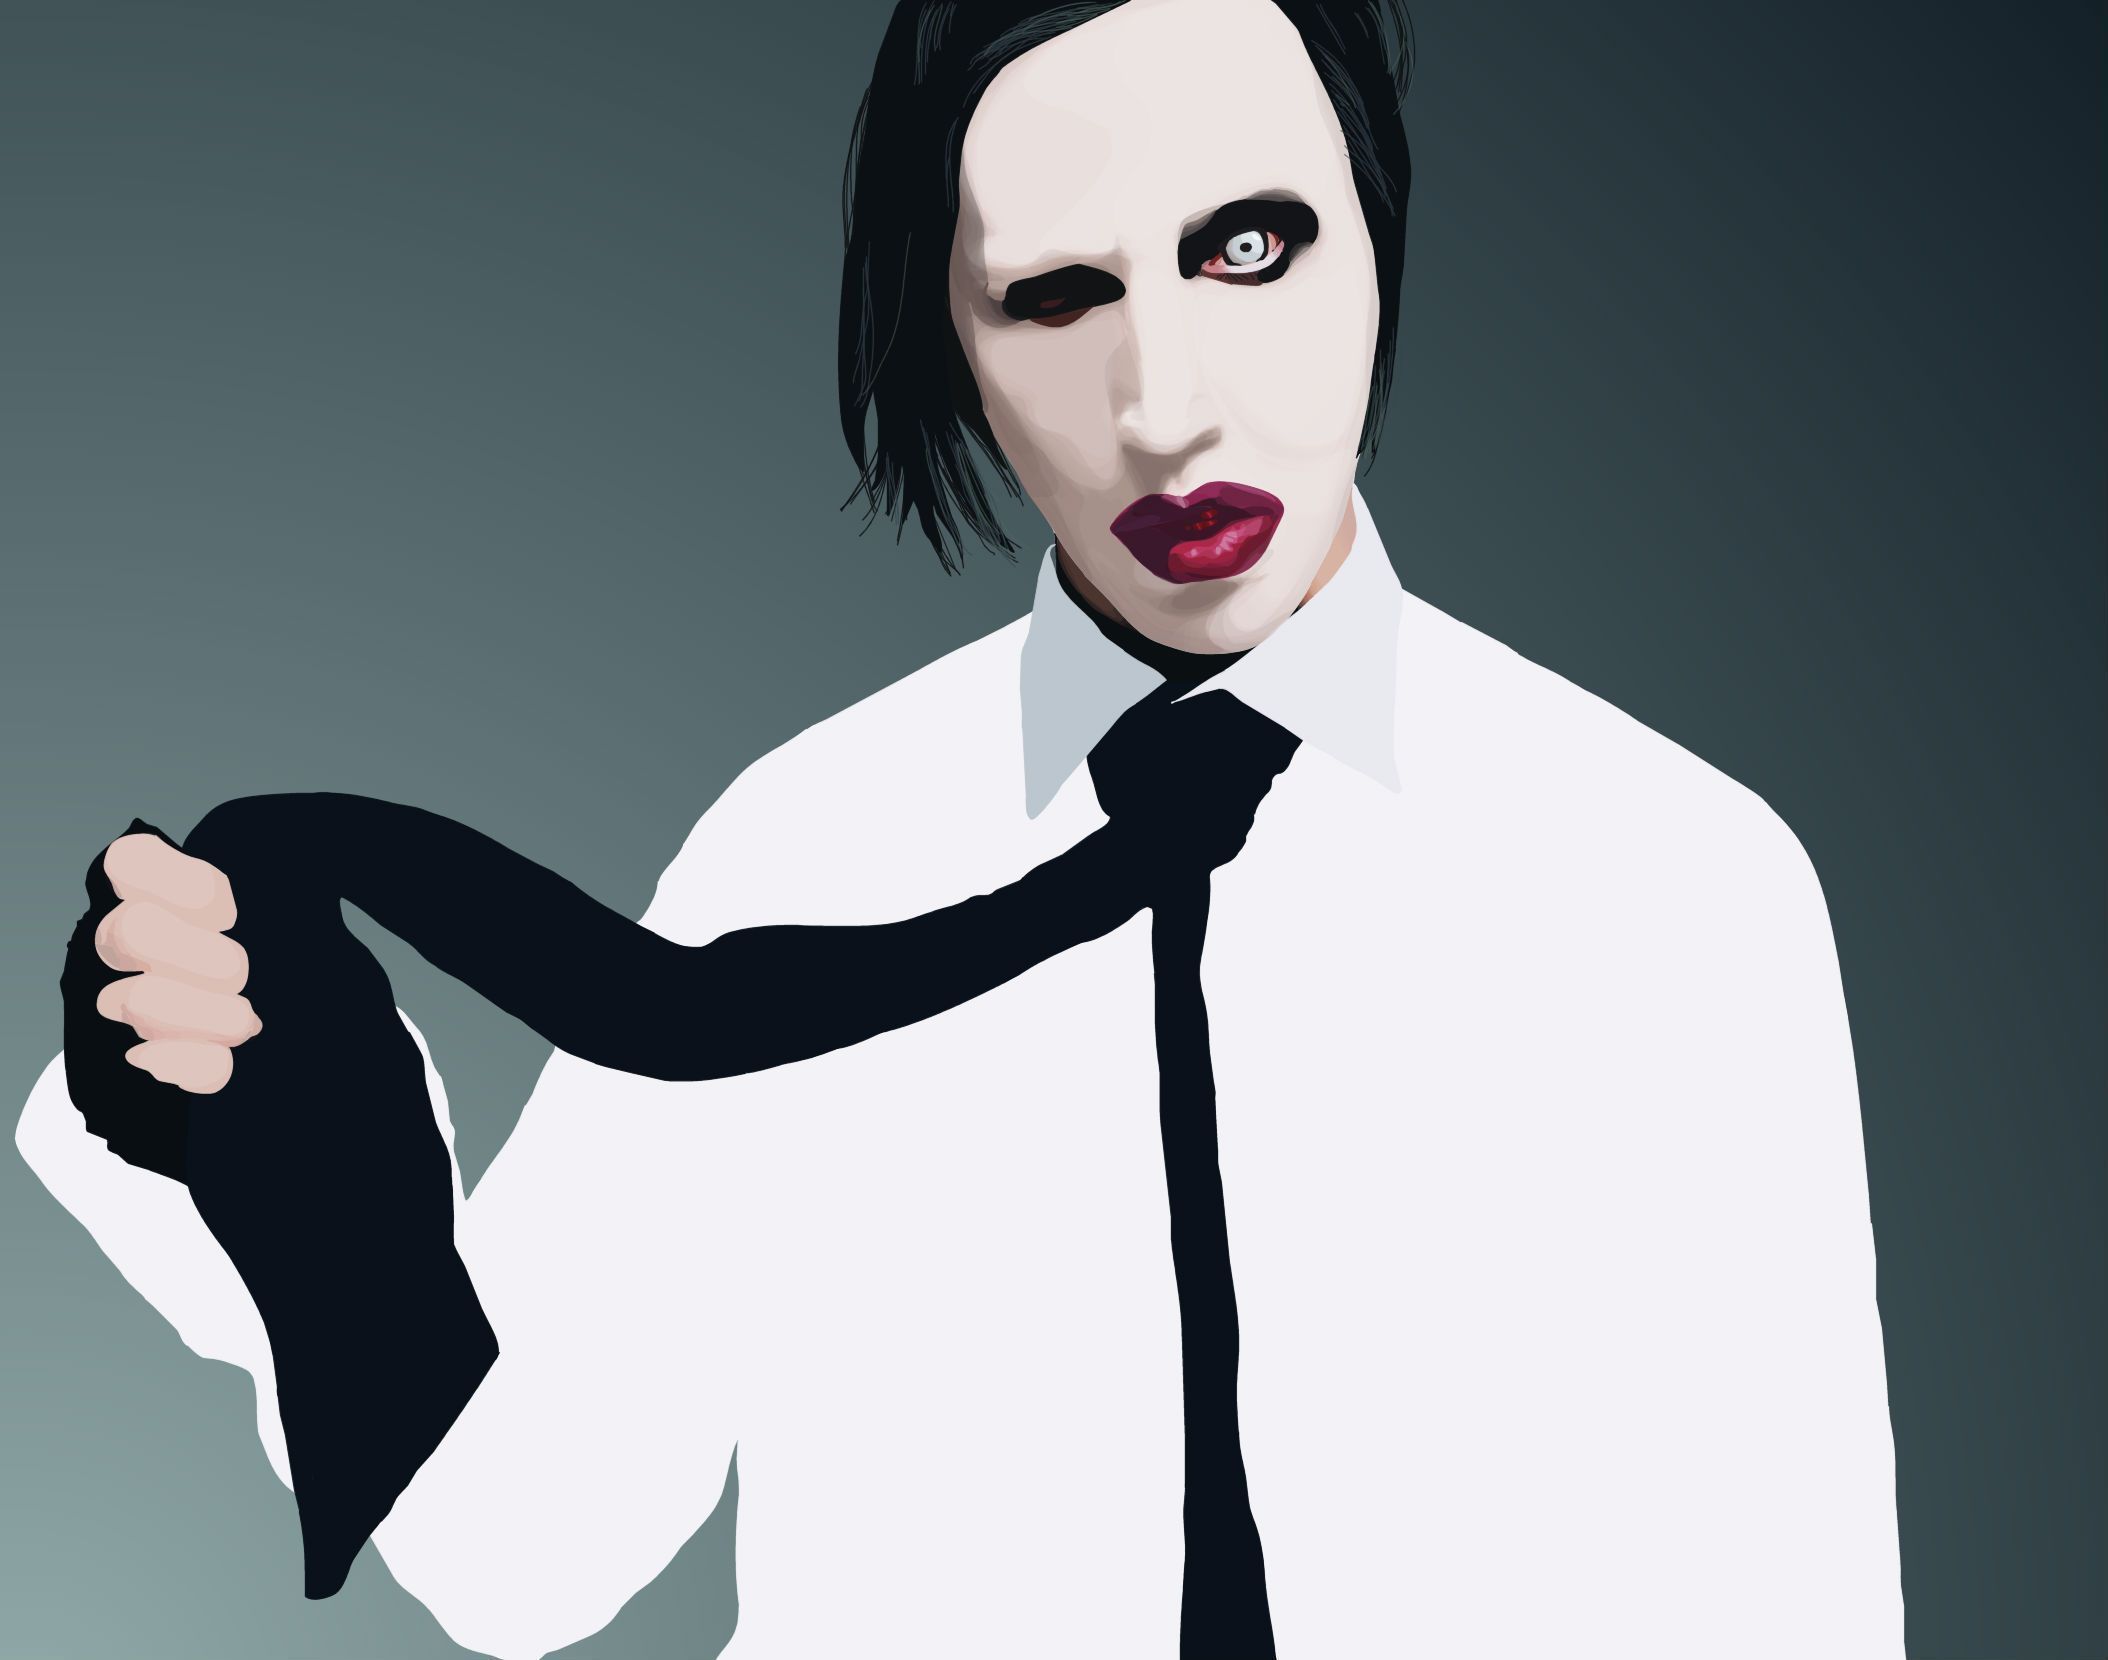 Marilyn Manson Industrial Metal Rock Heavy Shock Gothic - Marilyn Manson 1994 Wallpaper Android , HD Wallpaper & Backgrounds